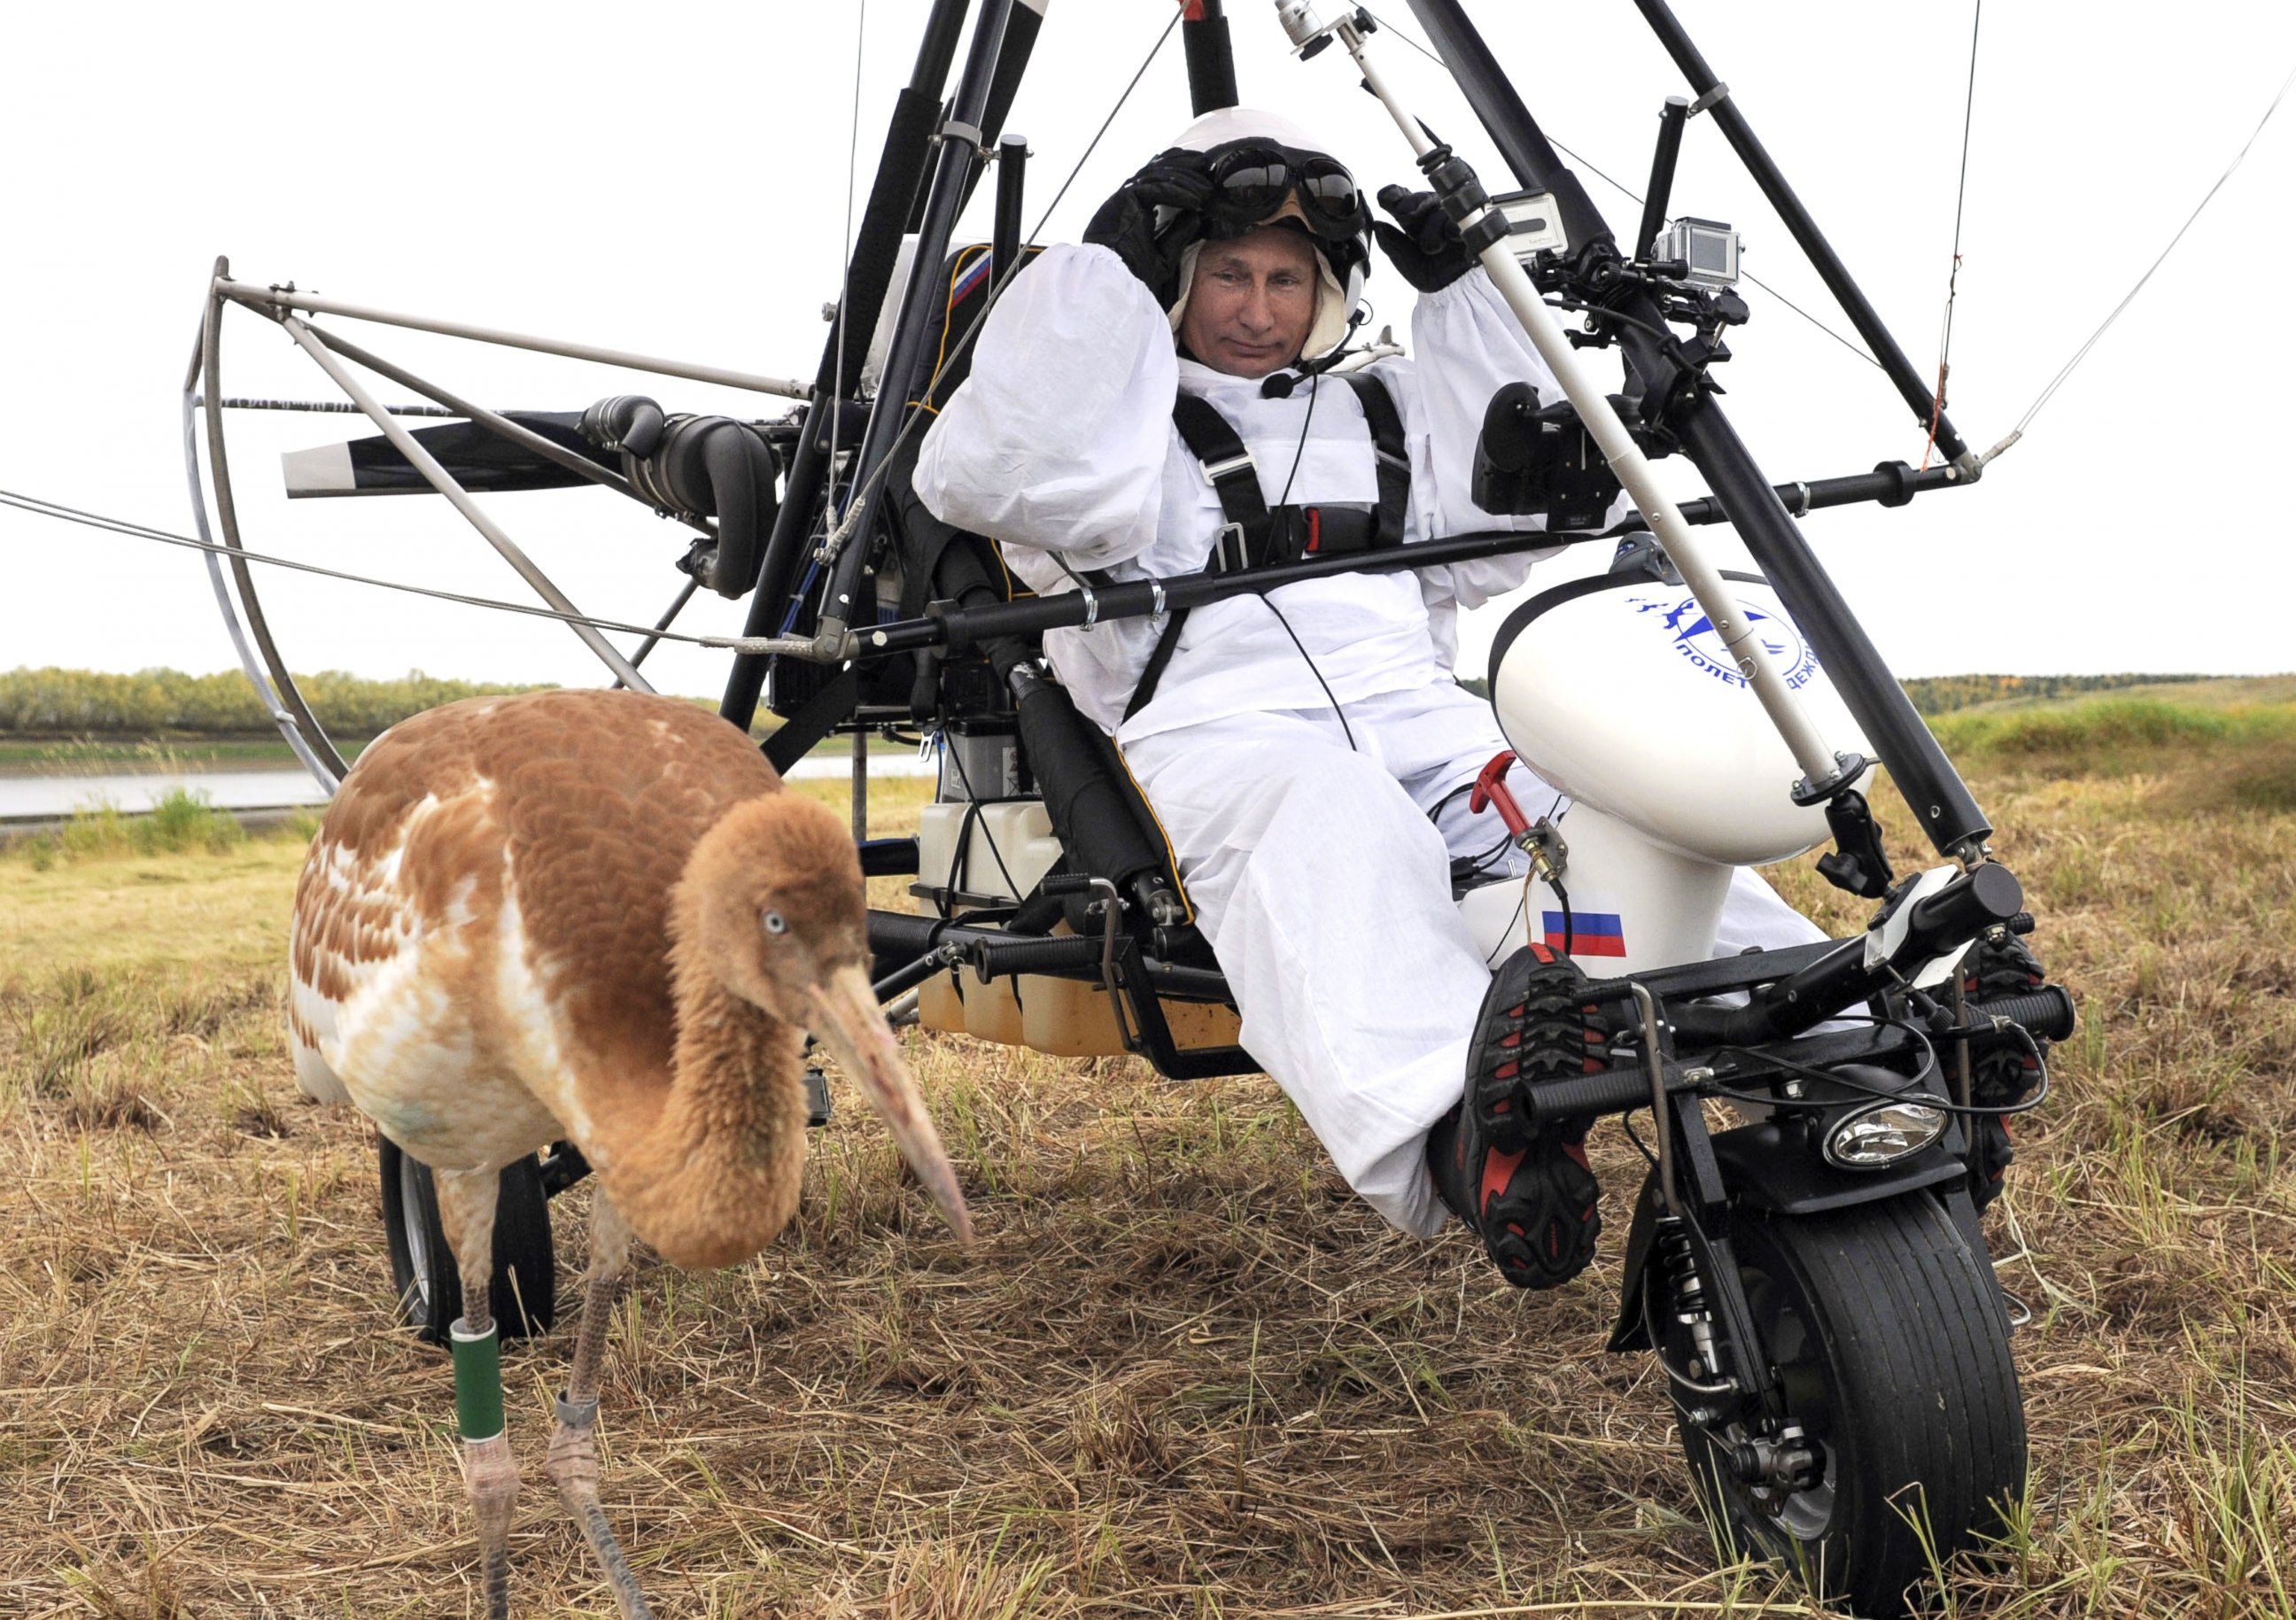 PHOTO: Russian President Vladimir Putin prepares to pilot a motorized hang glider while looking at a crane as he takes part in a scientific experiment as part of the "Flight of Hope," which aims to preserve a rare species of cranes, Sept. 5, 2012. 